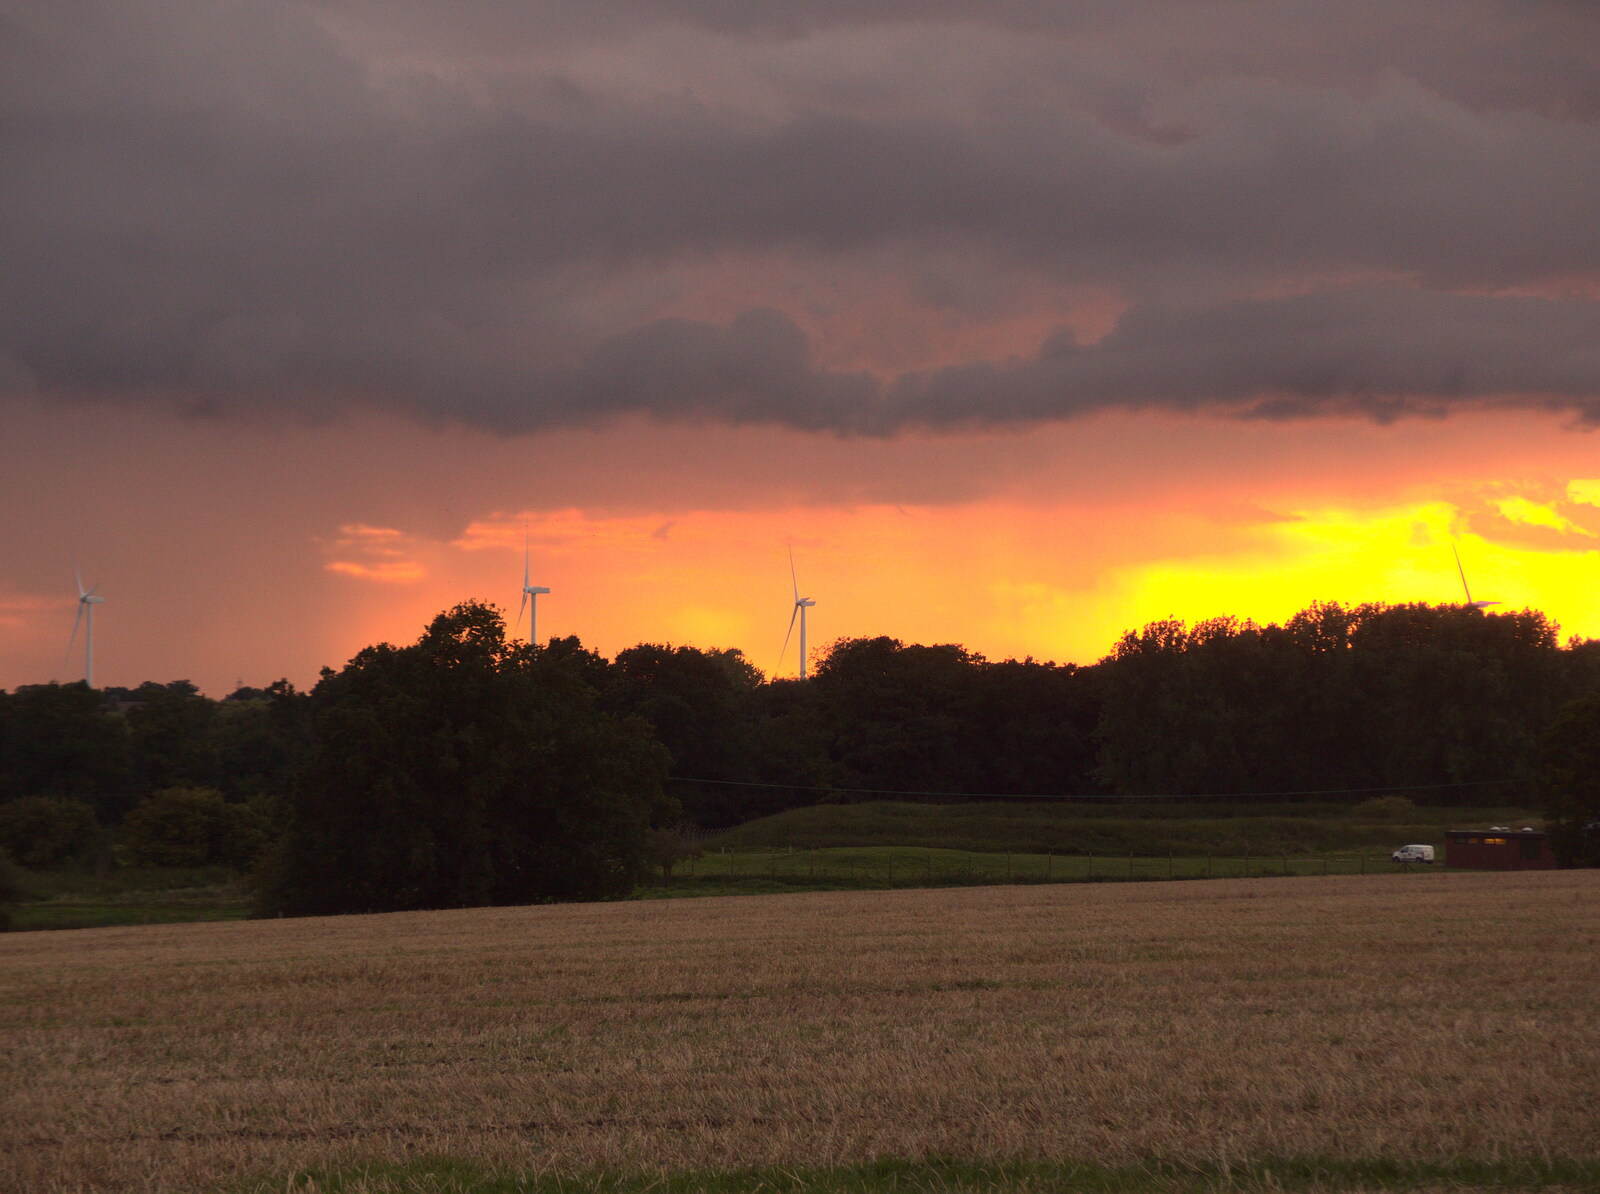 The BSCC at Yaxley and the Hoxne Beer Festival, Suffolk - 31st August 2017: Sunset, rain and wind turbines on the Denham road 